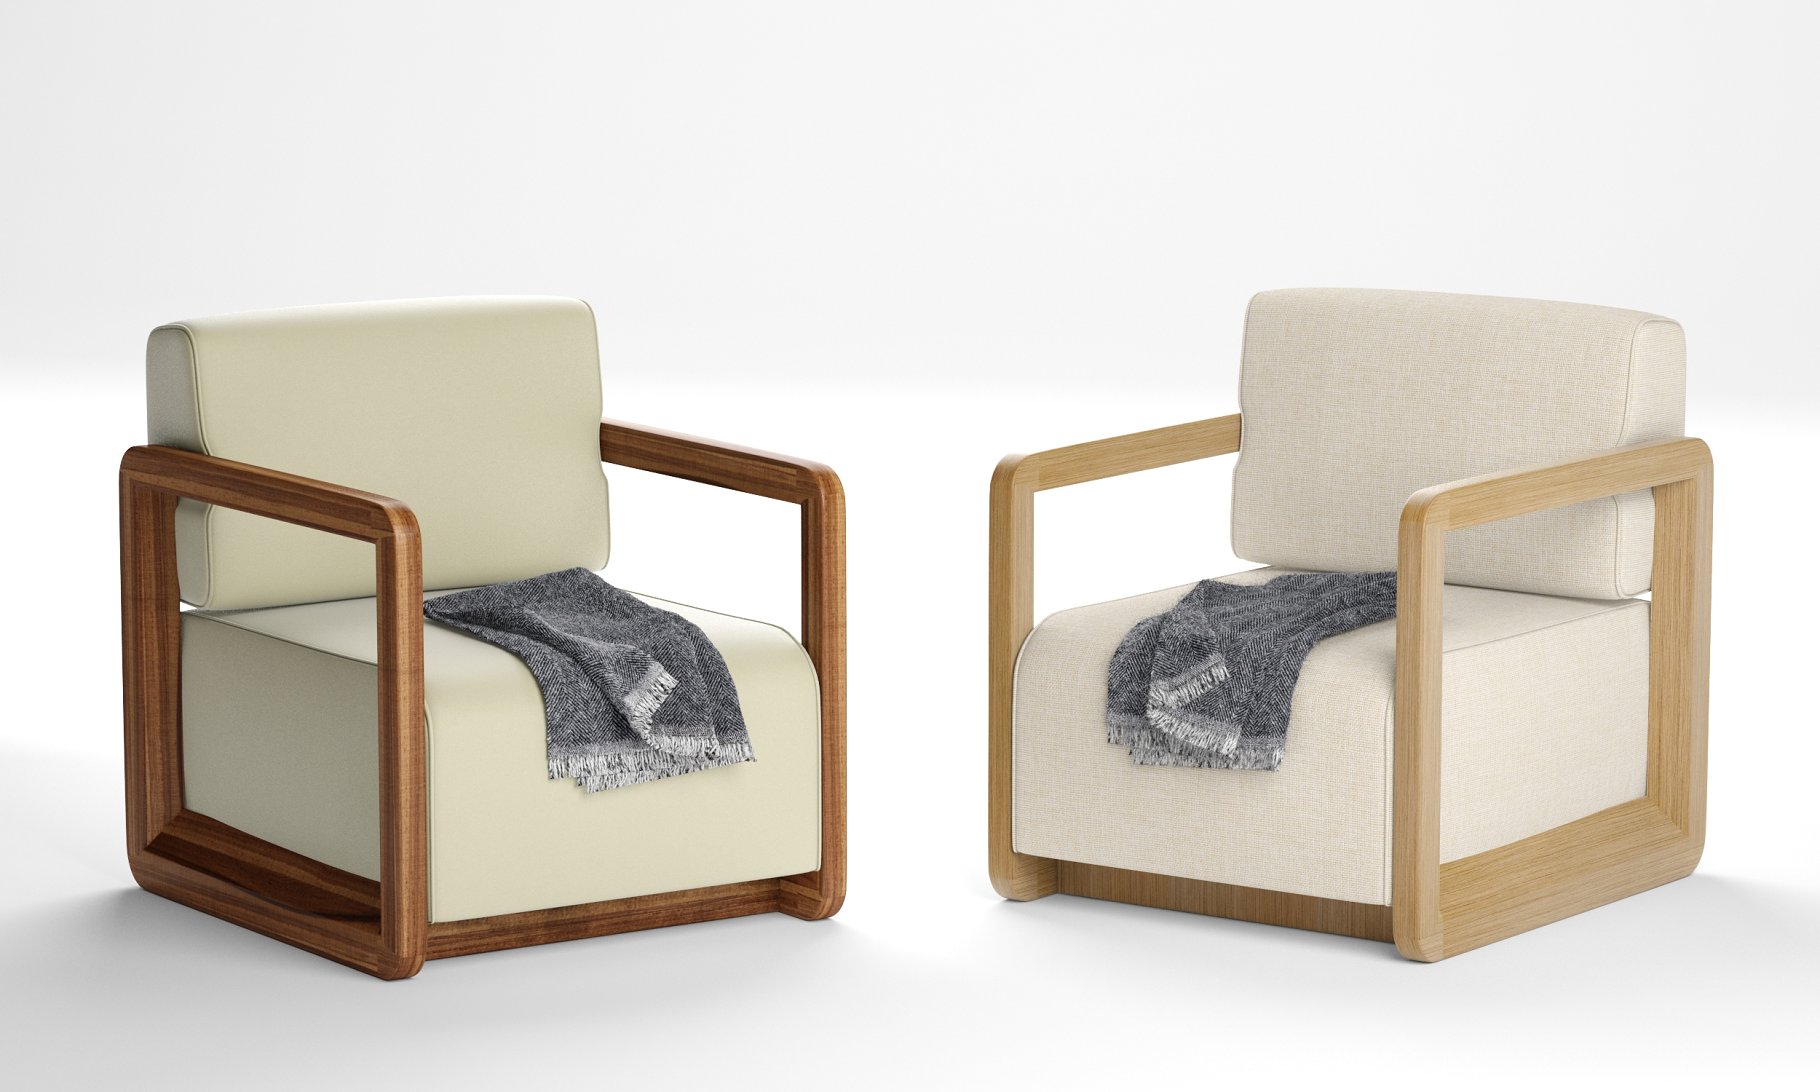 Rendering of a gorgeous 3d model of an upholstered armchair